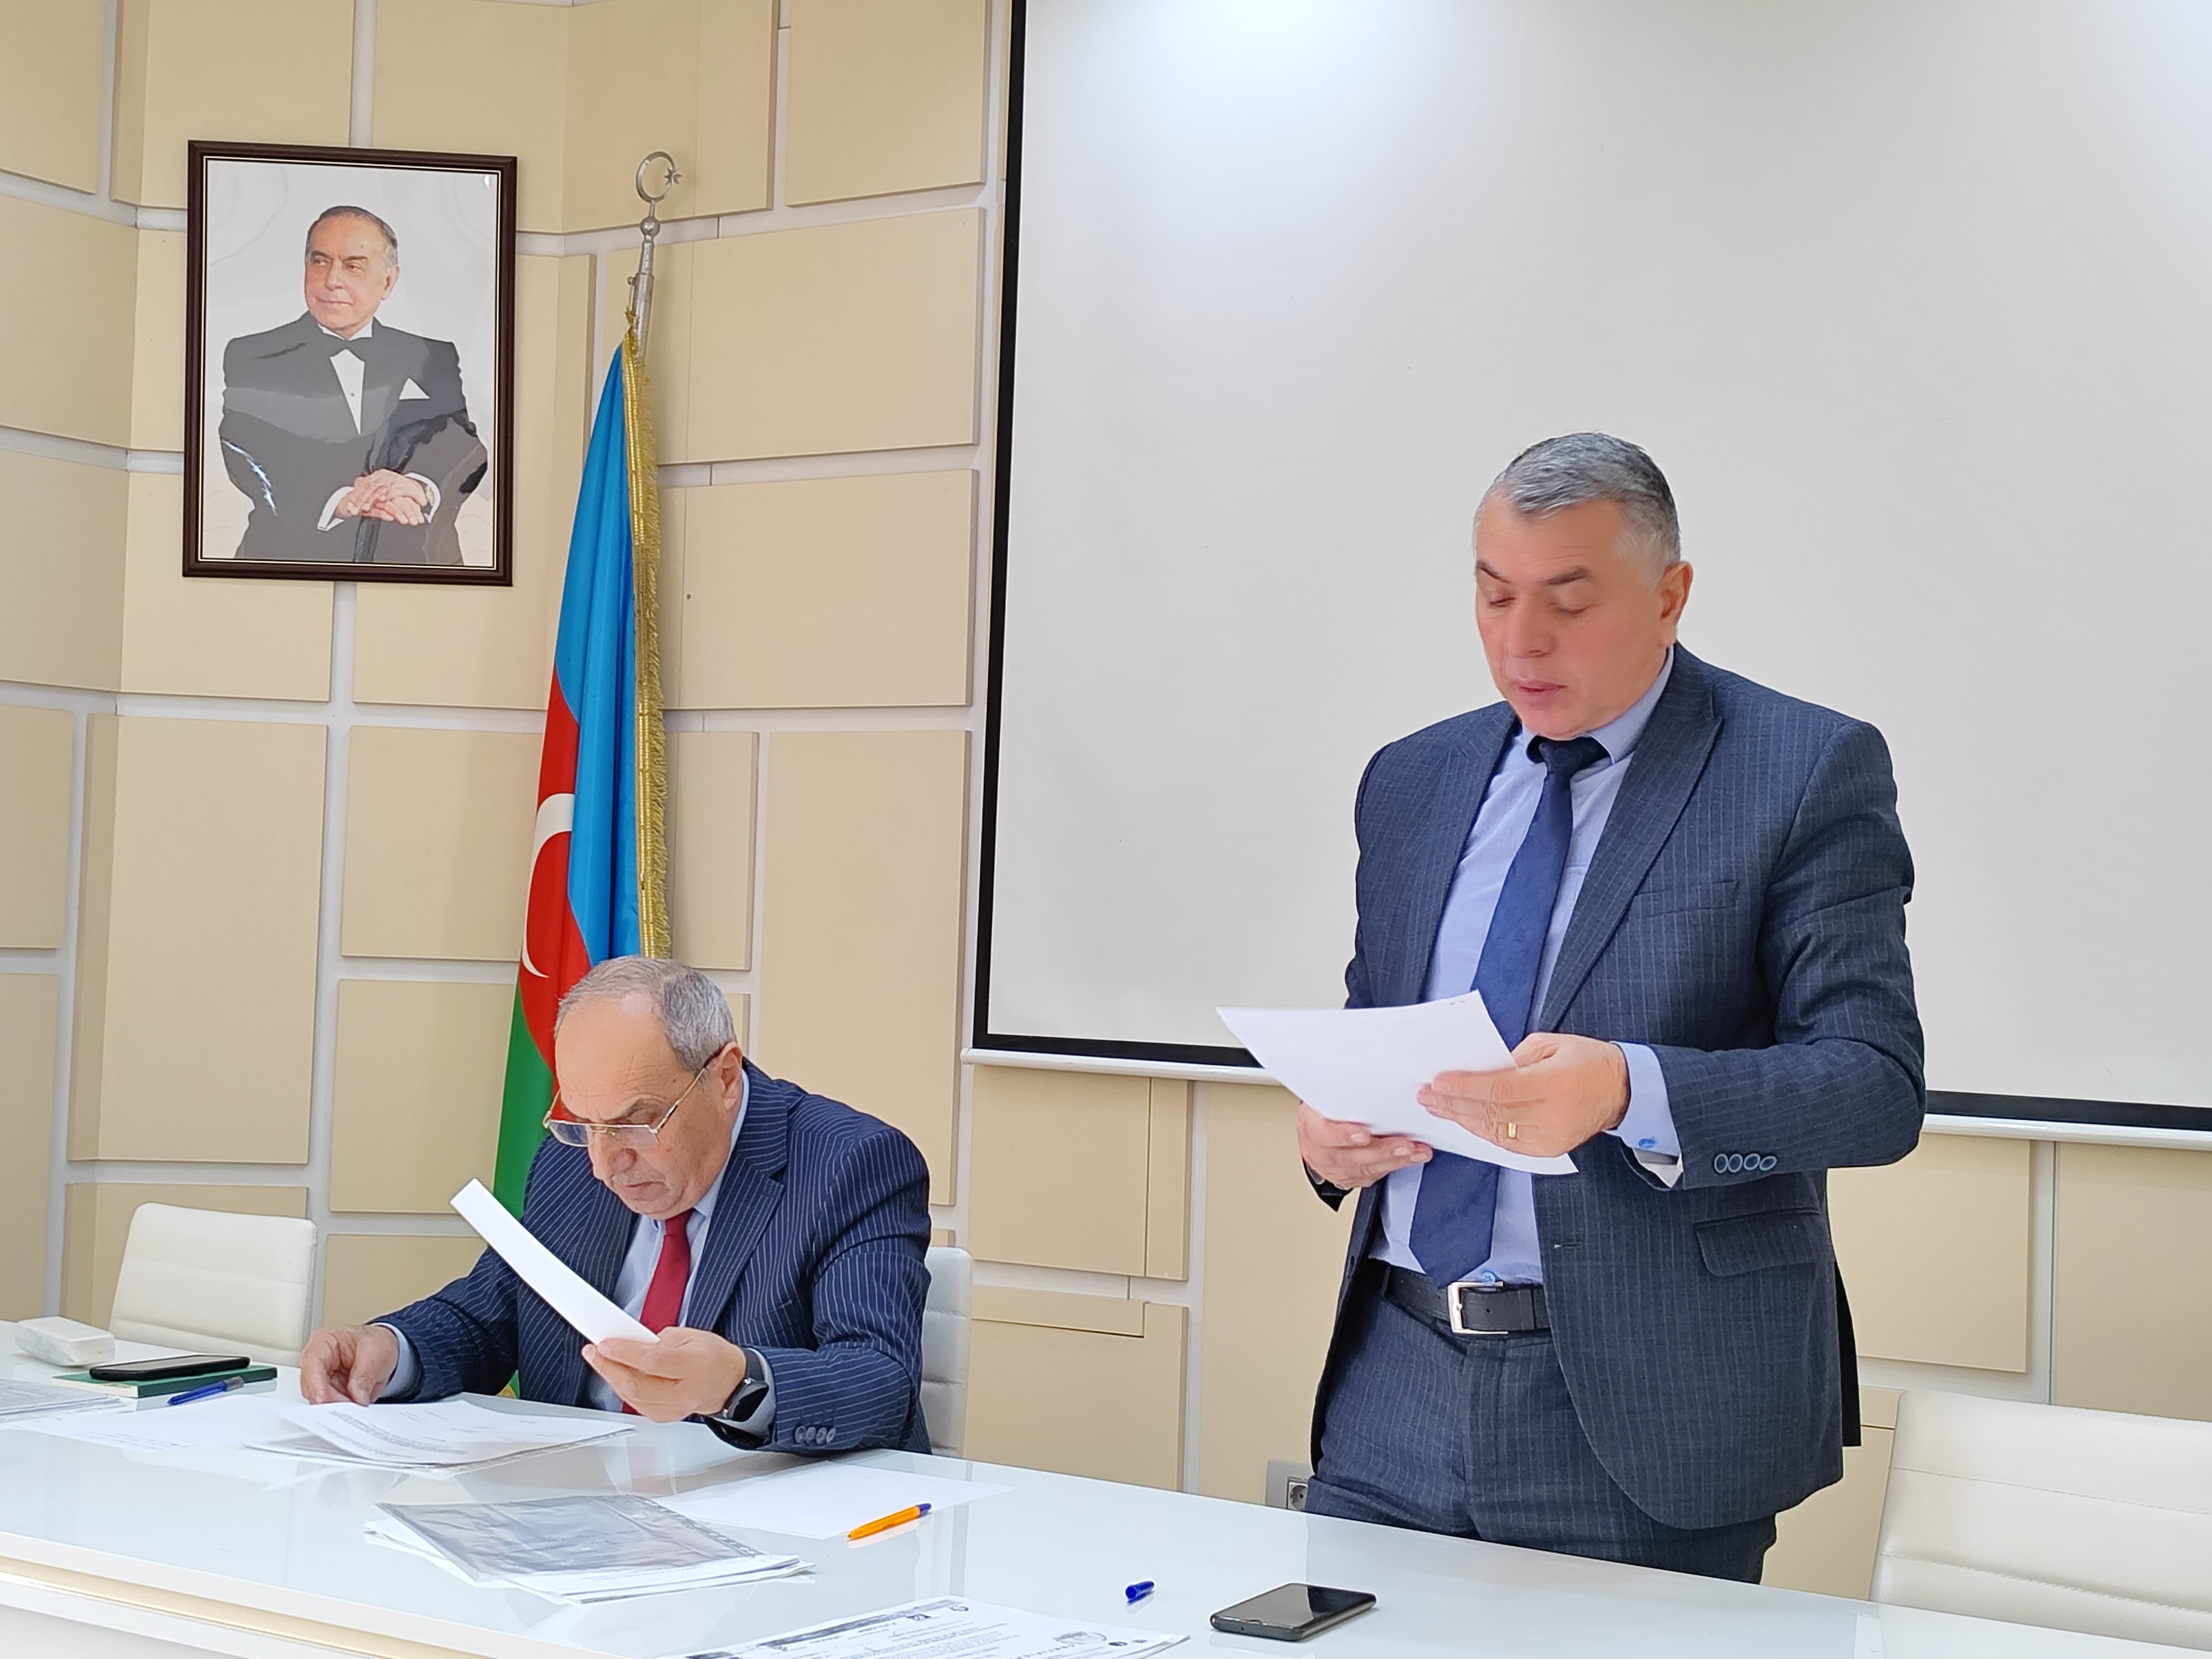 The doctoral and dissertation students passed certification at the Institute of Soil Science and Agrochemistry of the Ministry of Science and Education of the Republic of Azerbaijan.